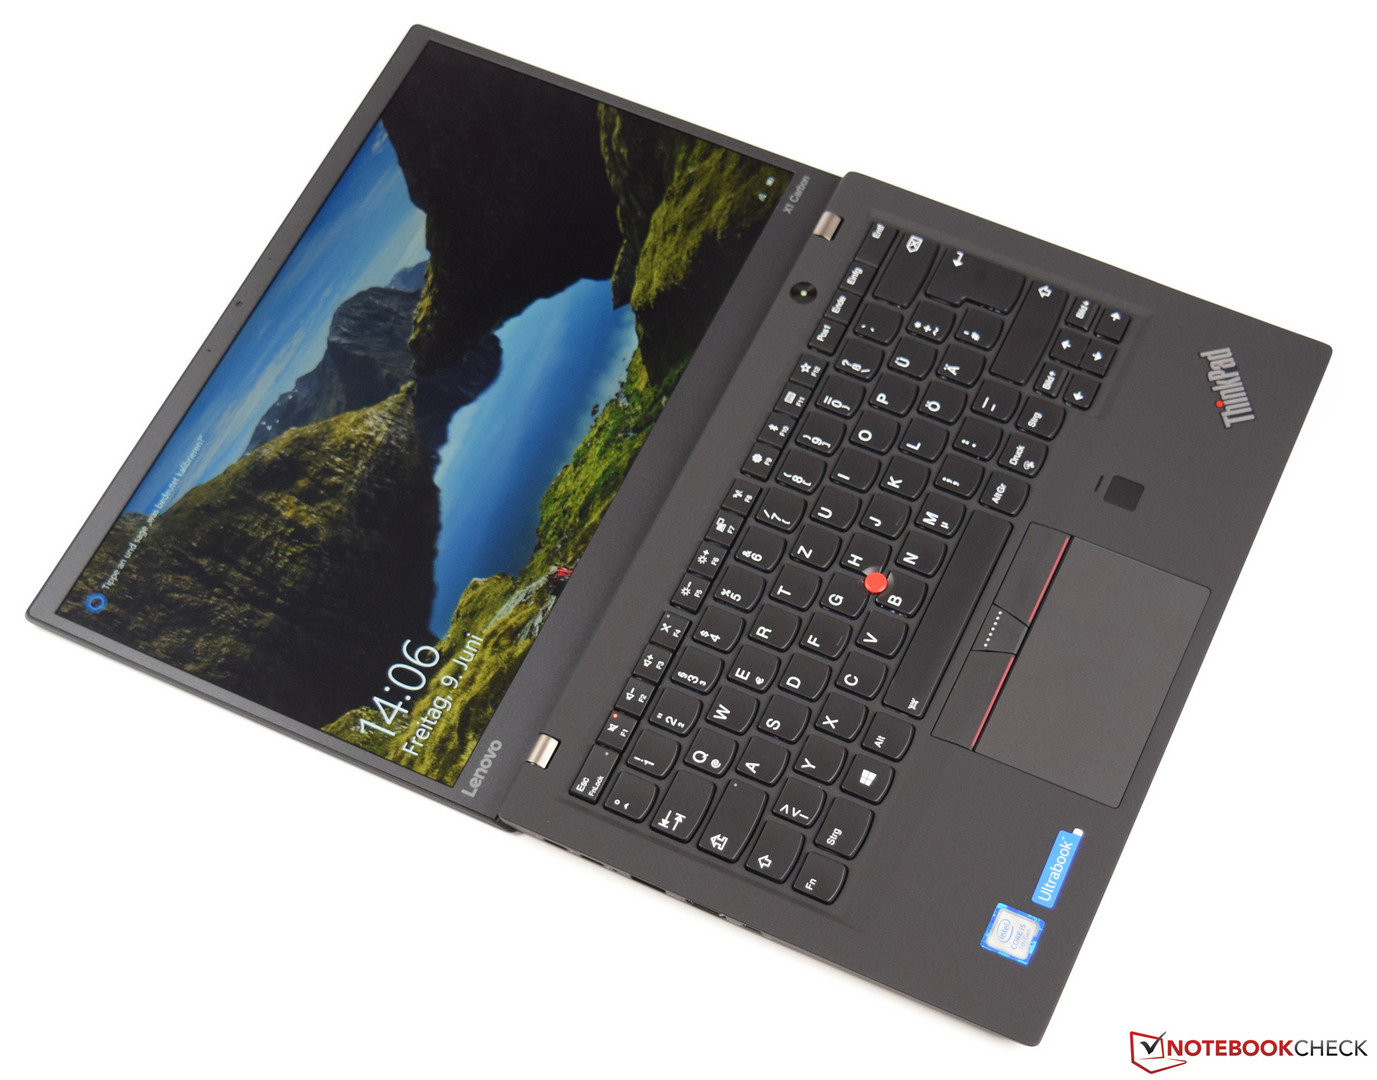 thinkpad x1 carbon review 2017